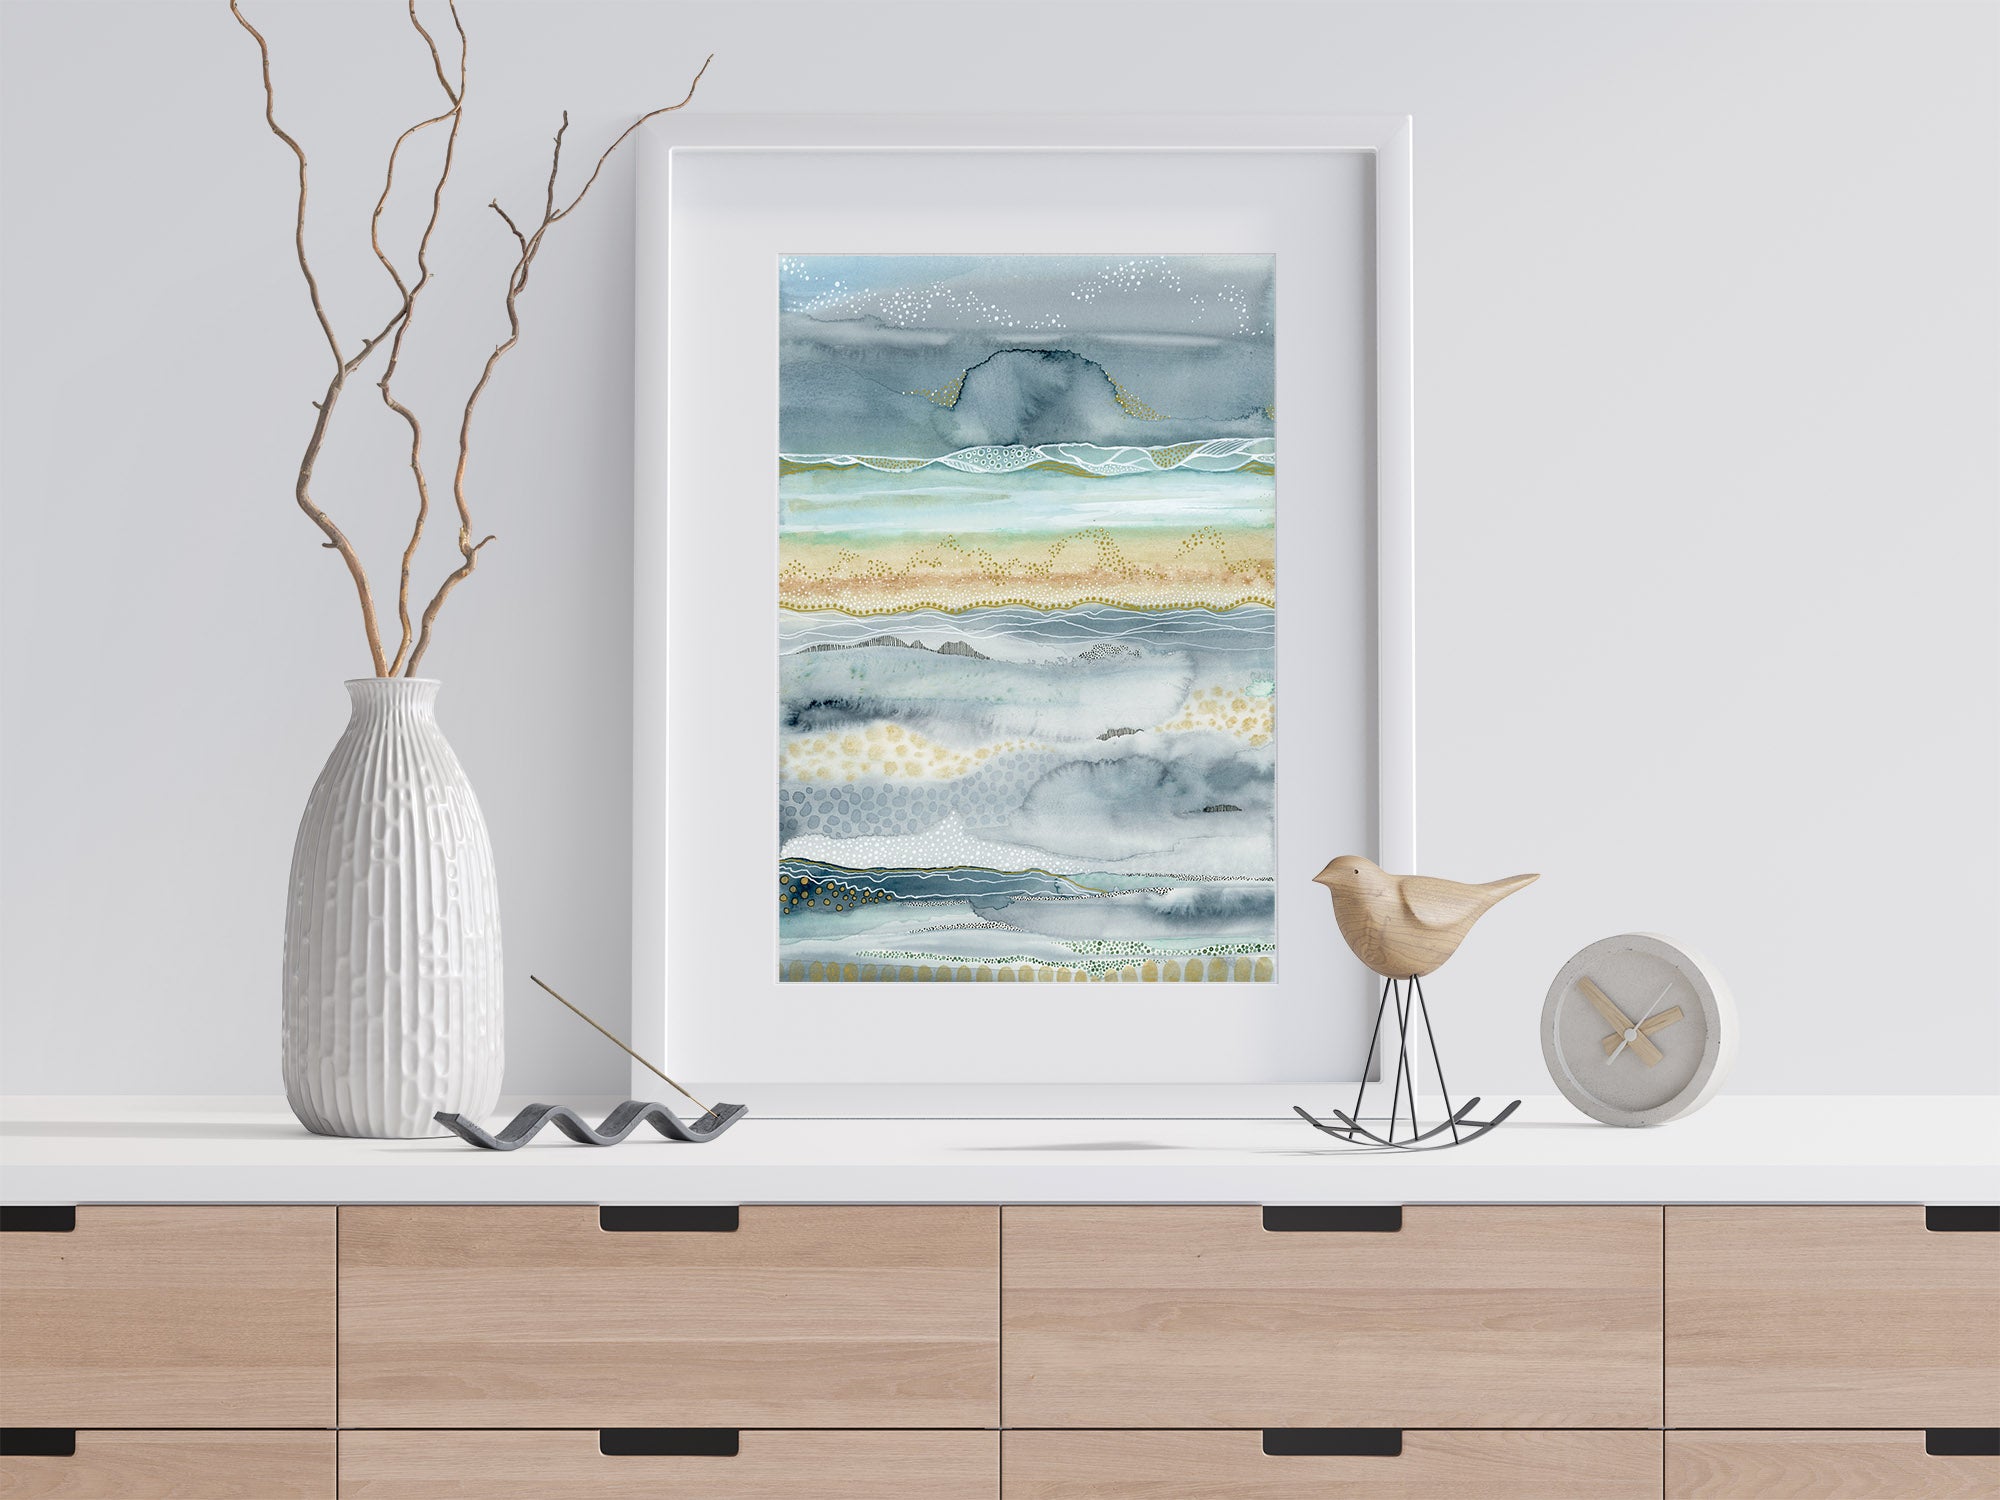  The is an image of a watercolor painting done by joanne grant art.  The painting is shades of green and teal and it is framed in a white frame.  The painting is sitting on a light wood table with a white top leaning against the wall.  To the left of the painting is a white textured vase with dried branches extending out of it.  To the right of the painting is a wood bird statue.  Next to that is a small clock.